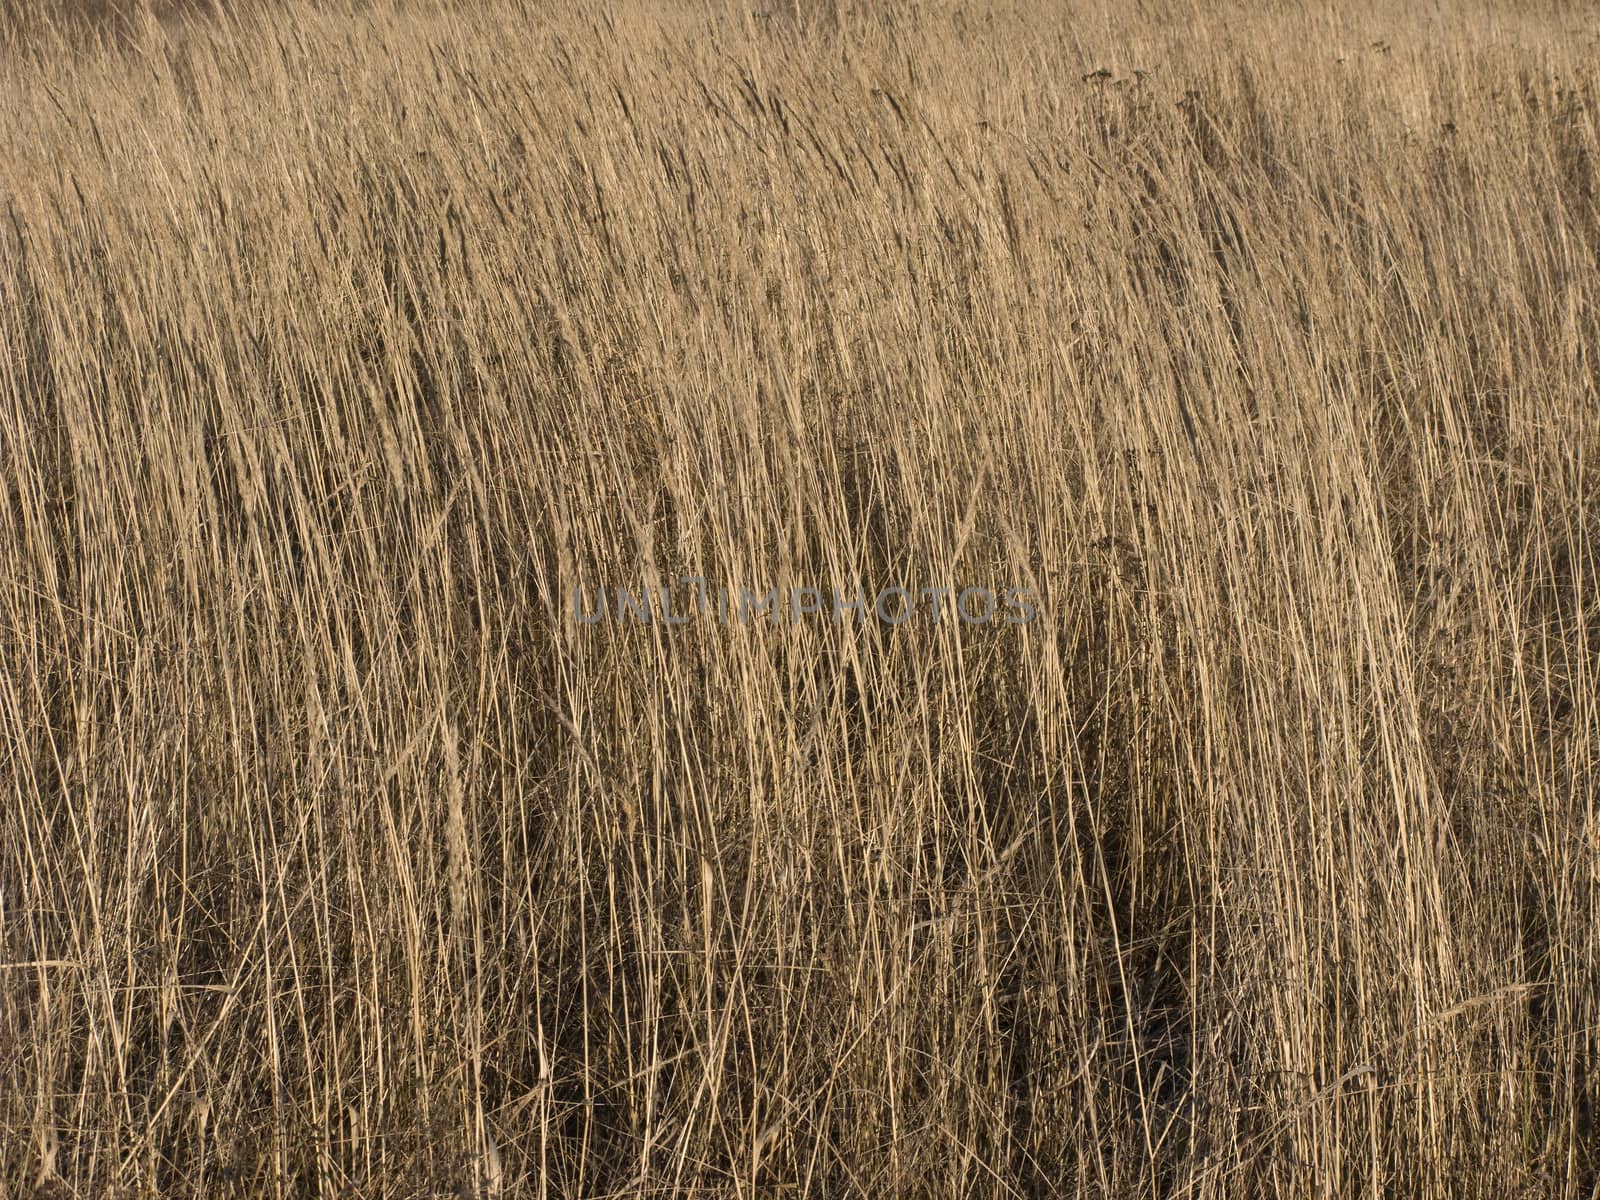 Last year dry yellow grass background texture